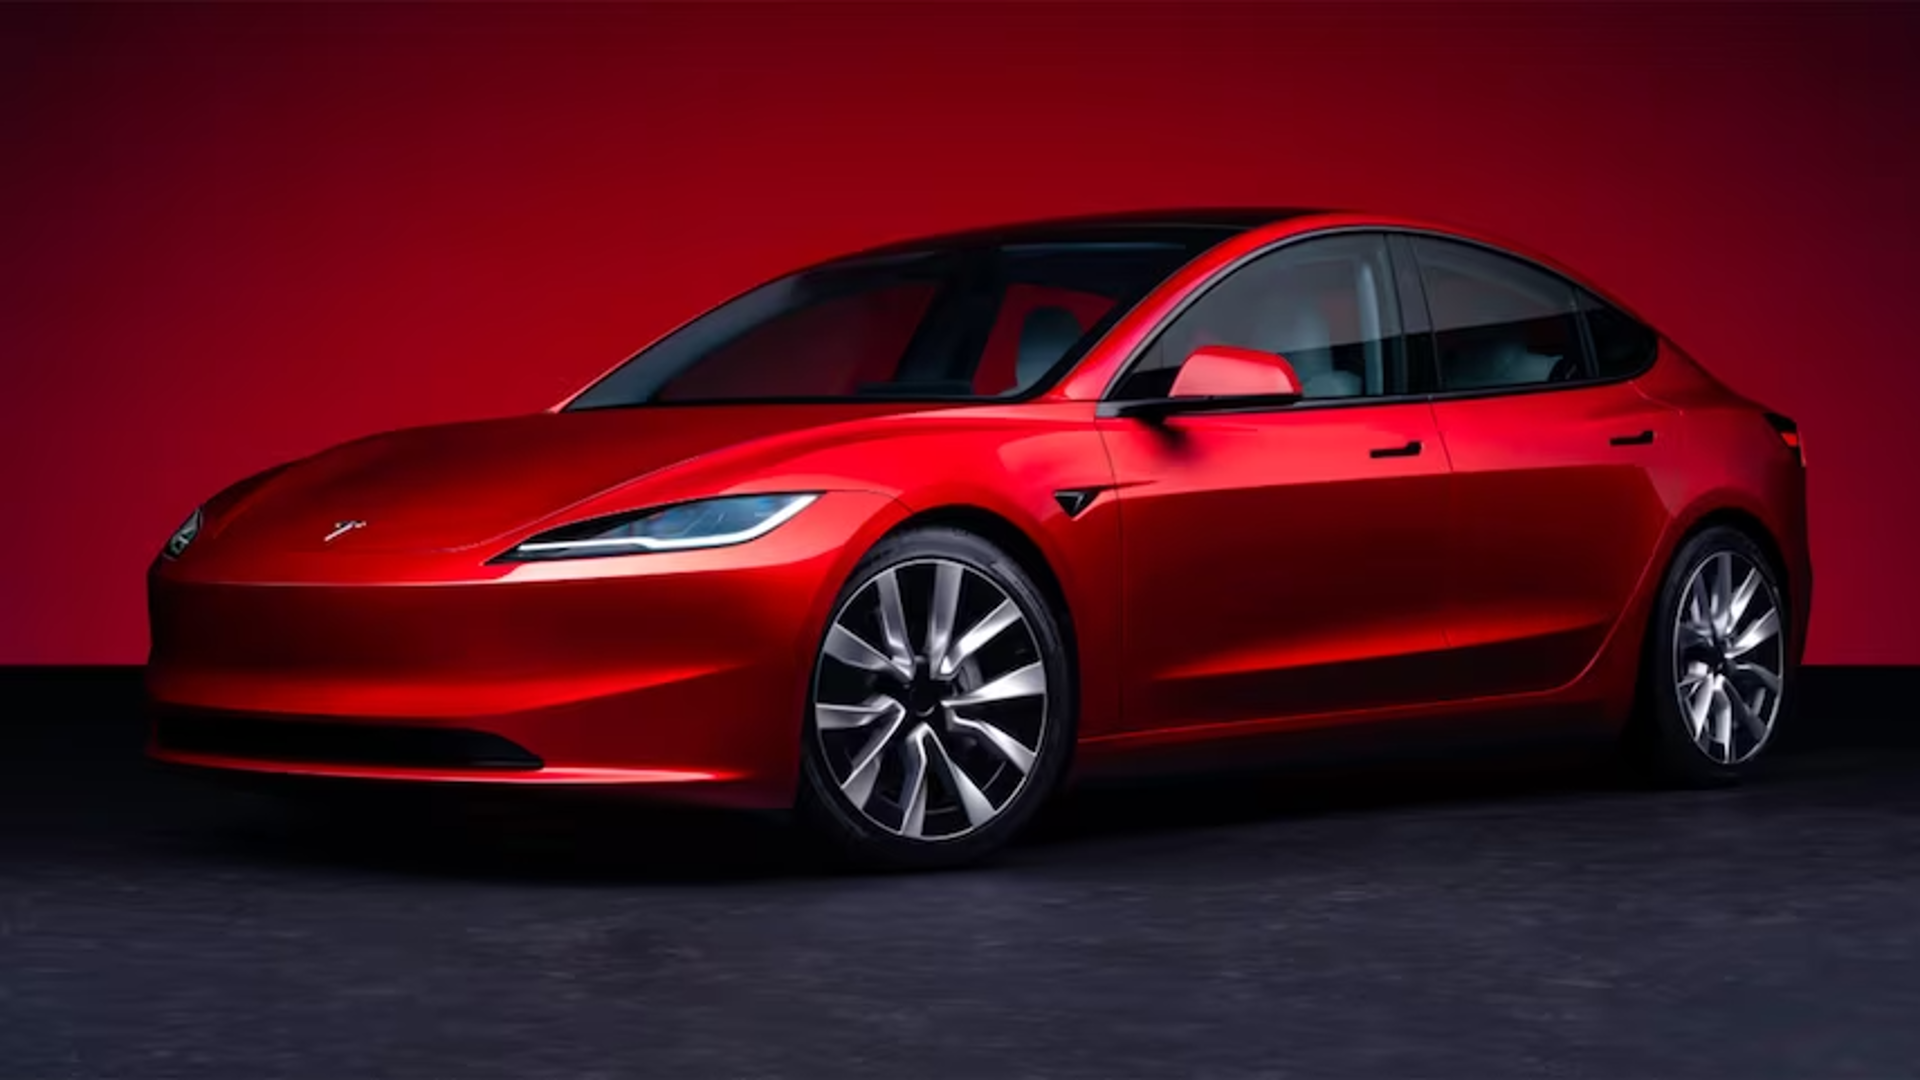 Should You Wait For The Refreshed Tesla Model 3 Or Buy A Heavily